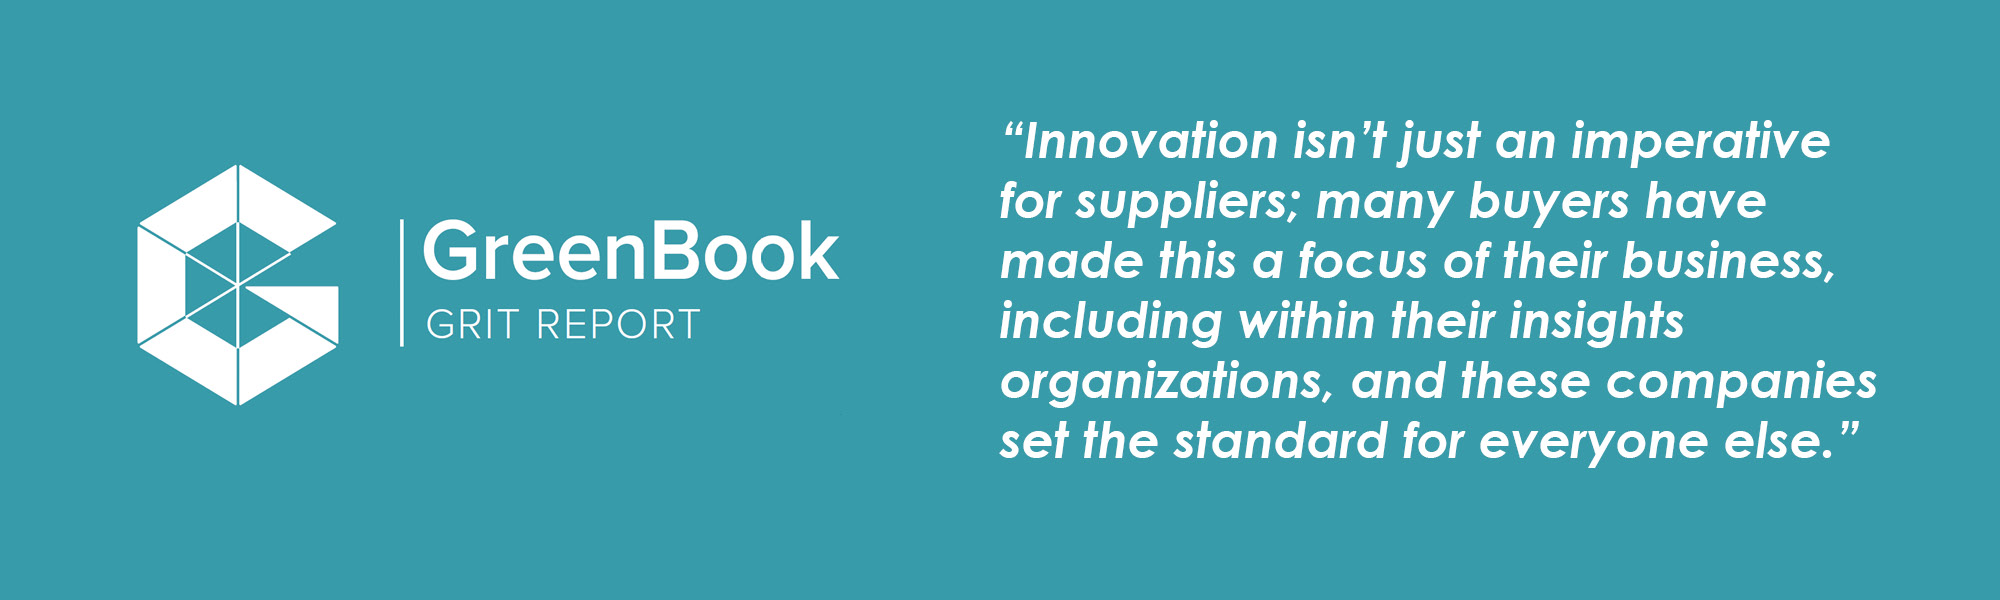 GreenBook GRIT Report logo with quote from report "Innovation isn't just an imperative for suppliers; many buyers have made this a focus of their business, including within their insights organizations, and these companies set the standard for everyone else."